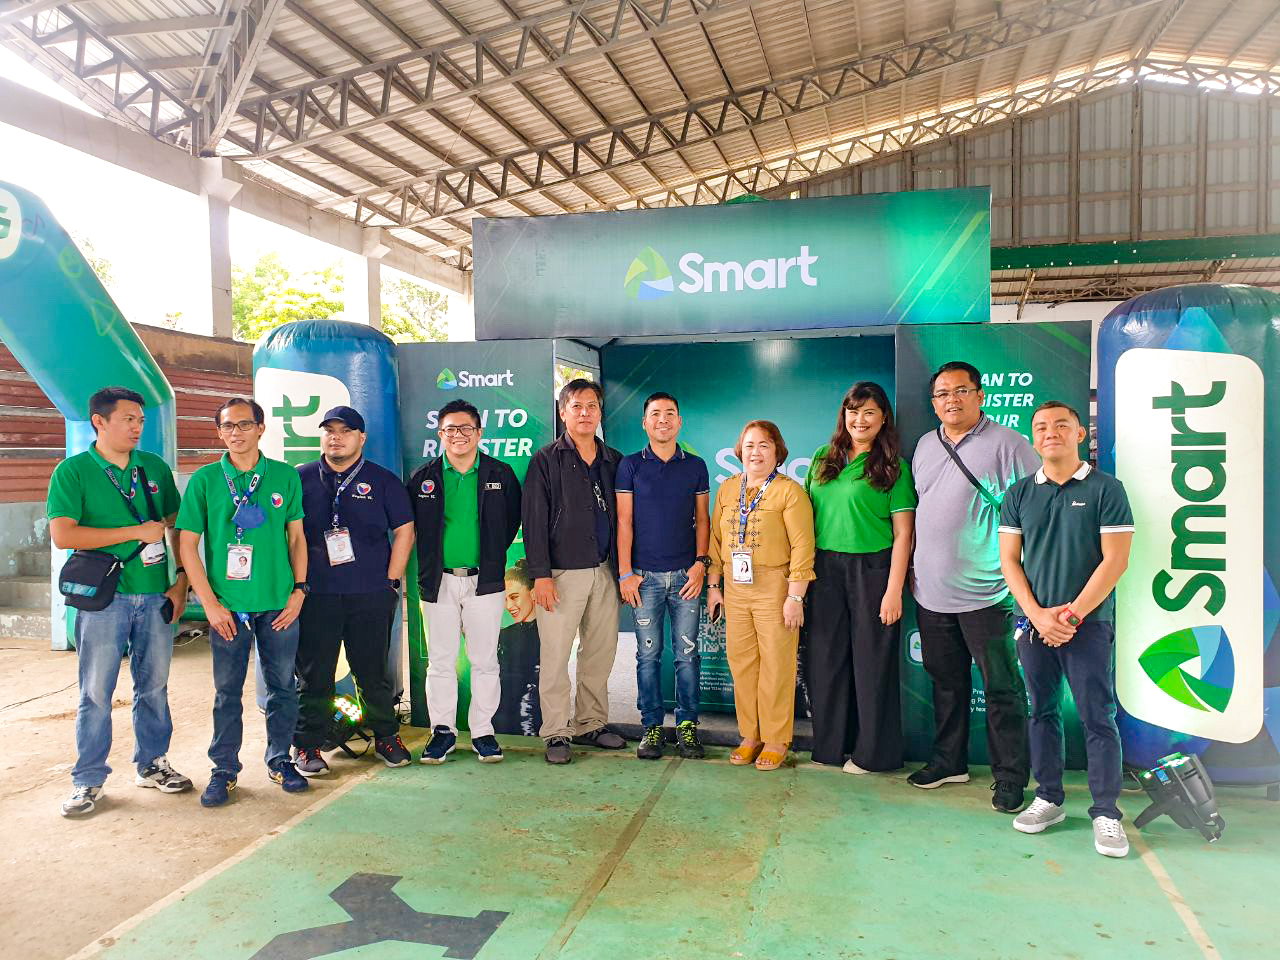 Smart sets up Sim Registration Booth in Carles, Iloilo